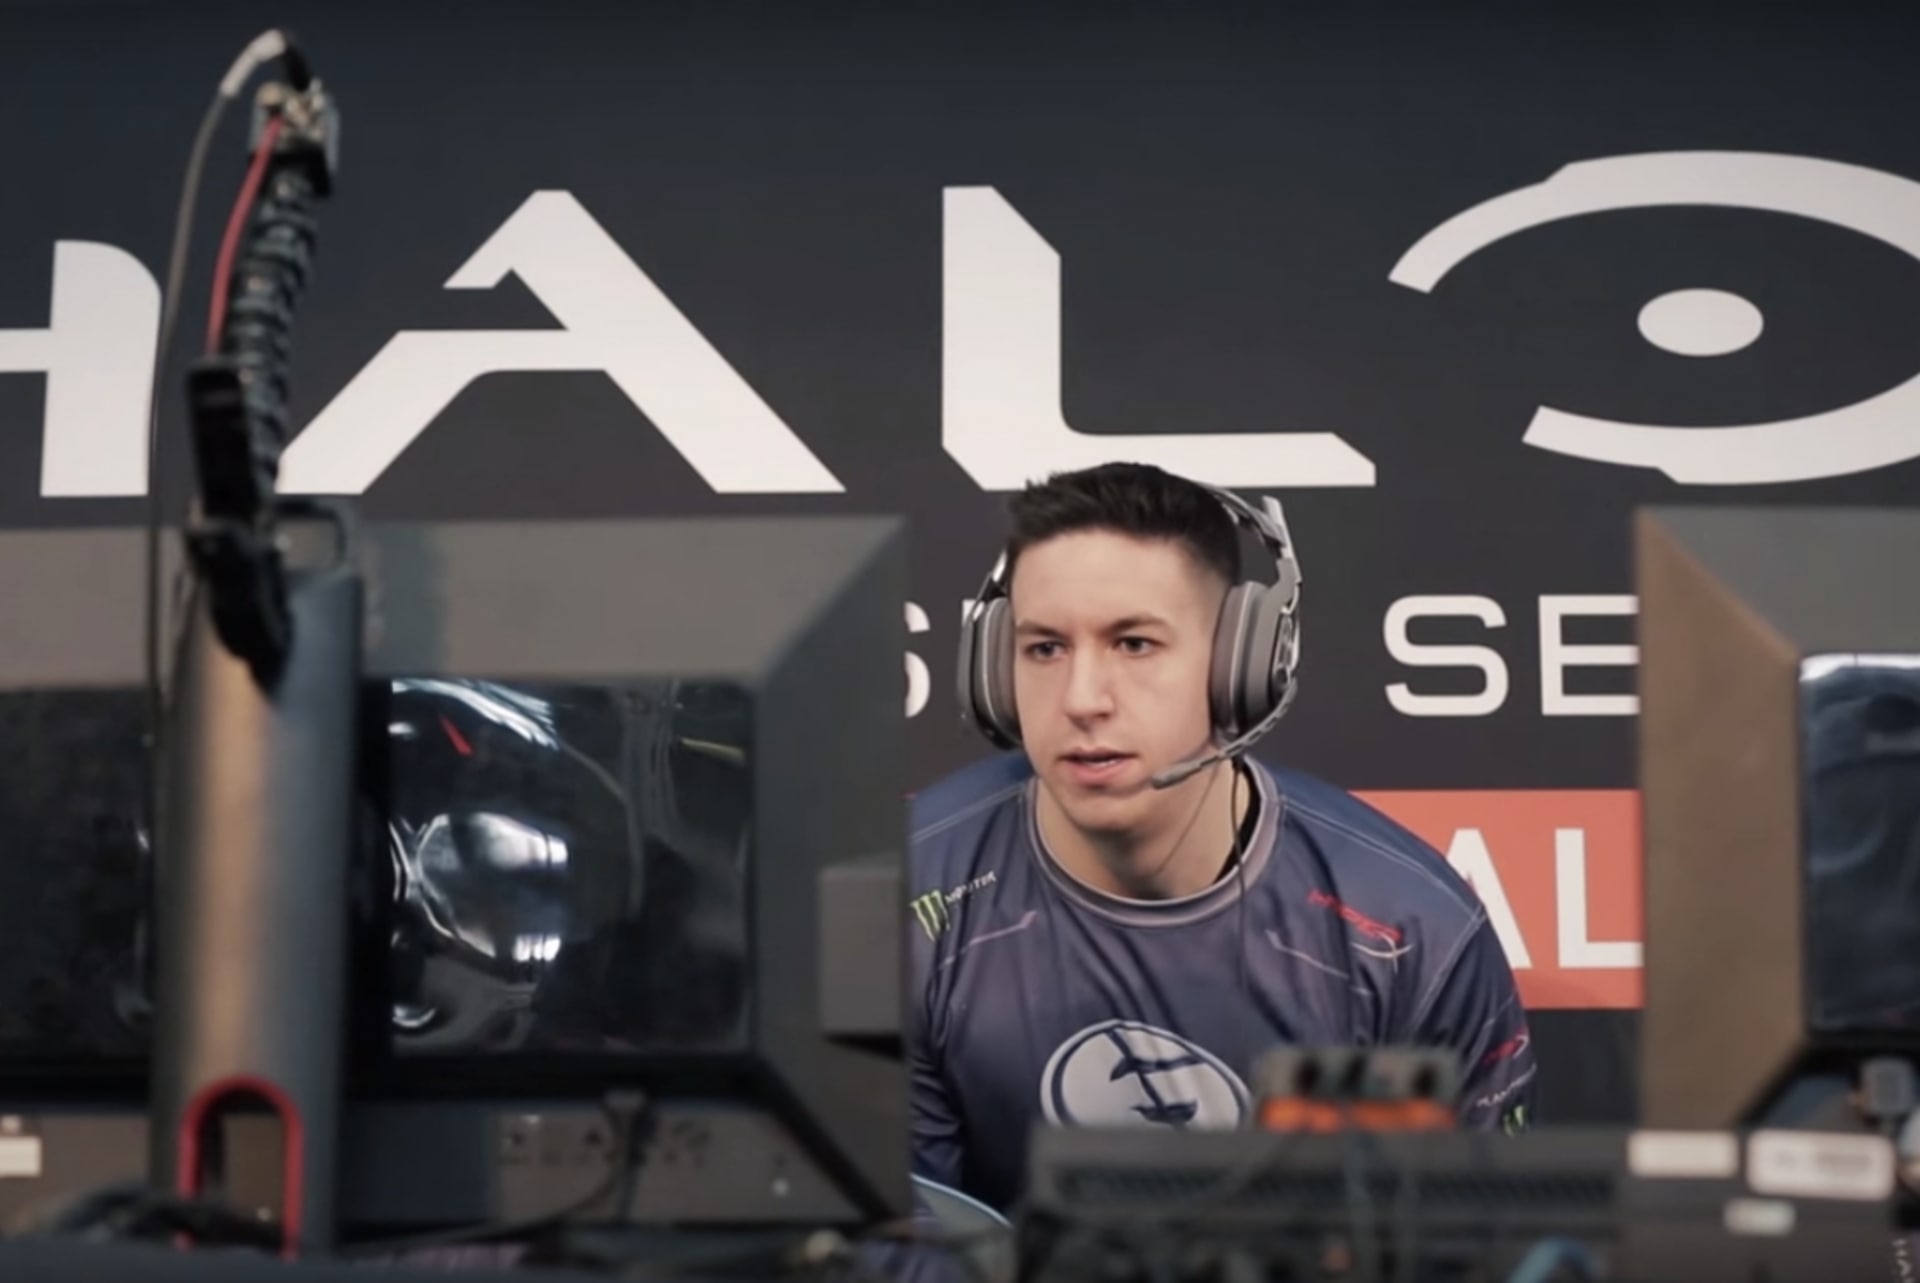 Evil Geniuses' Halo coach Ryan Towey looks on during the Halo Championship Series finals in 2015. Image via YouTube.